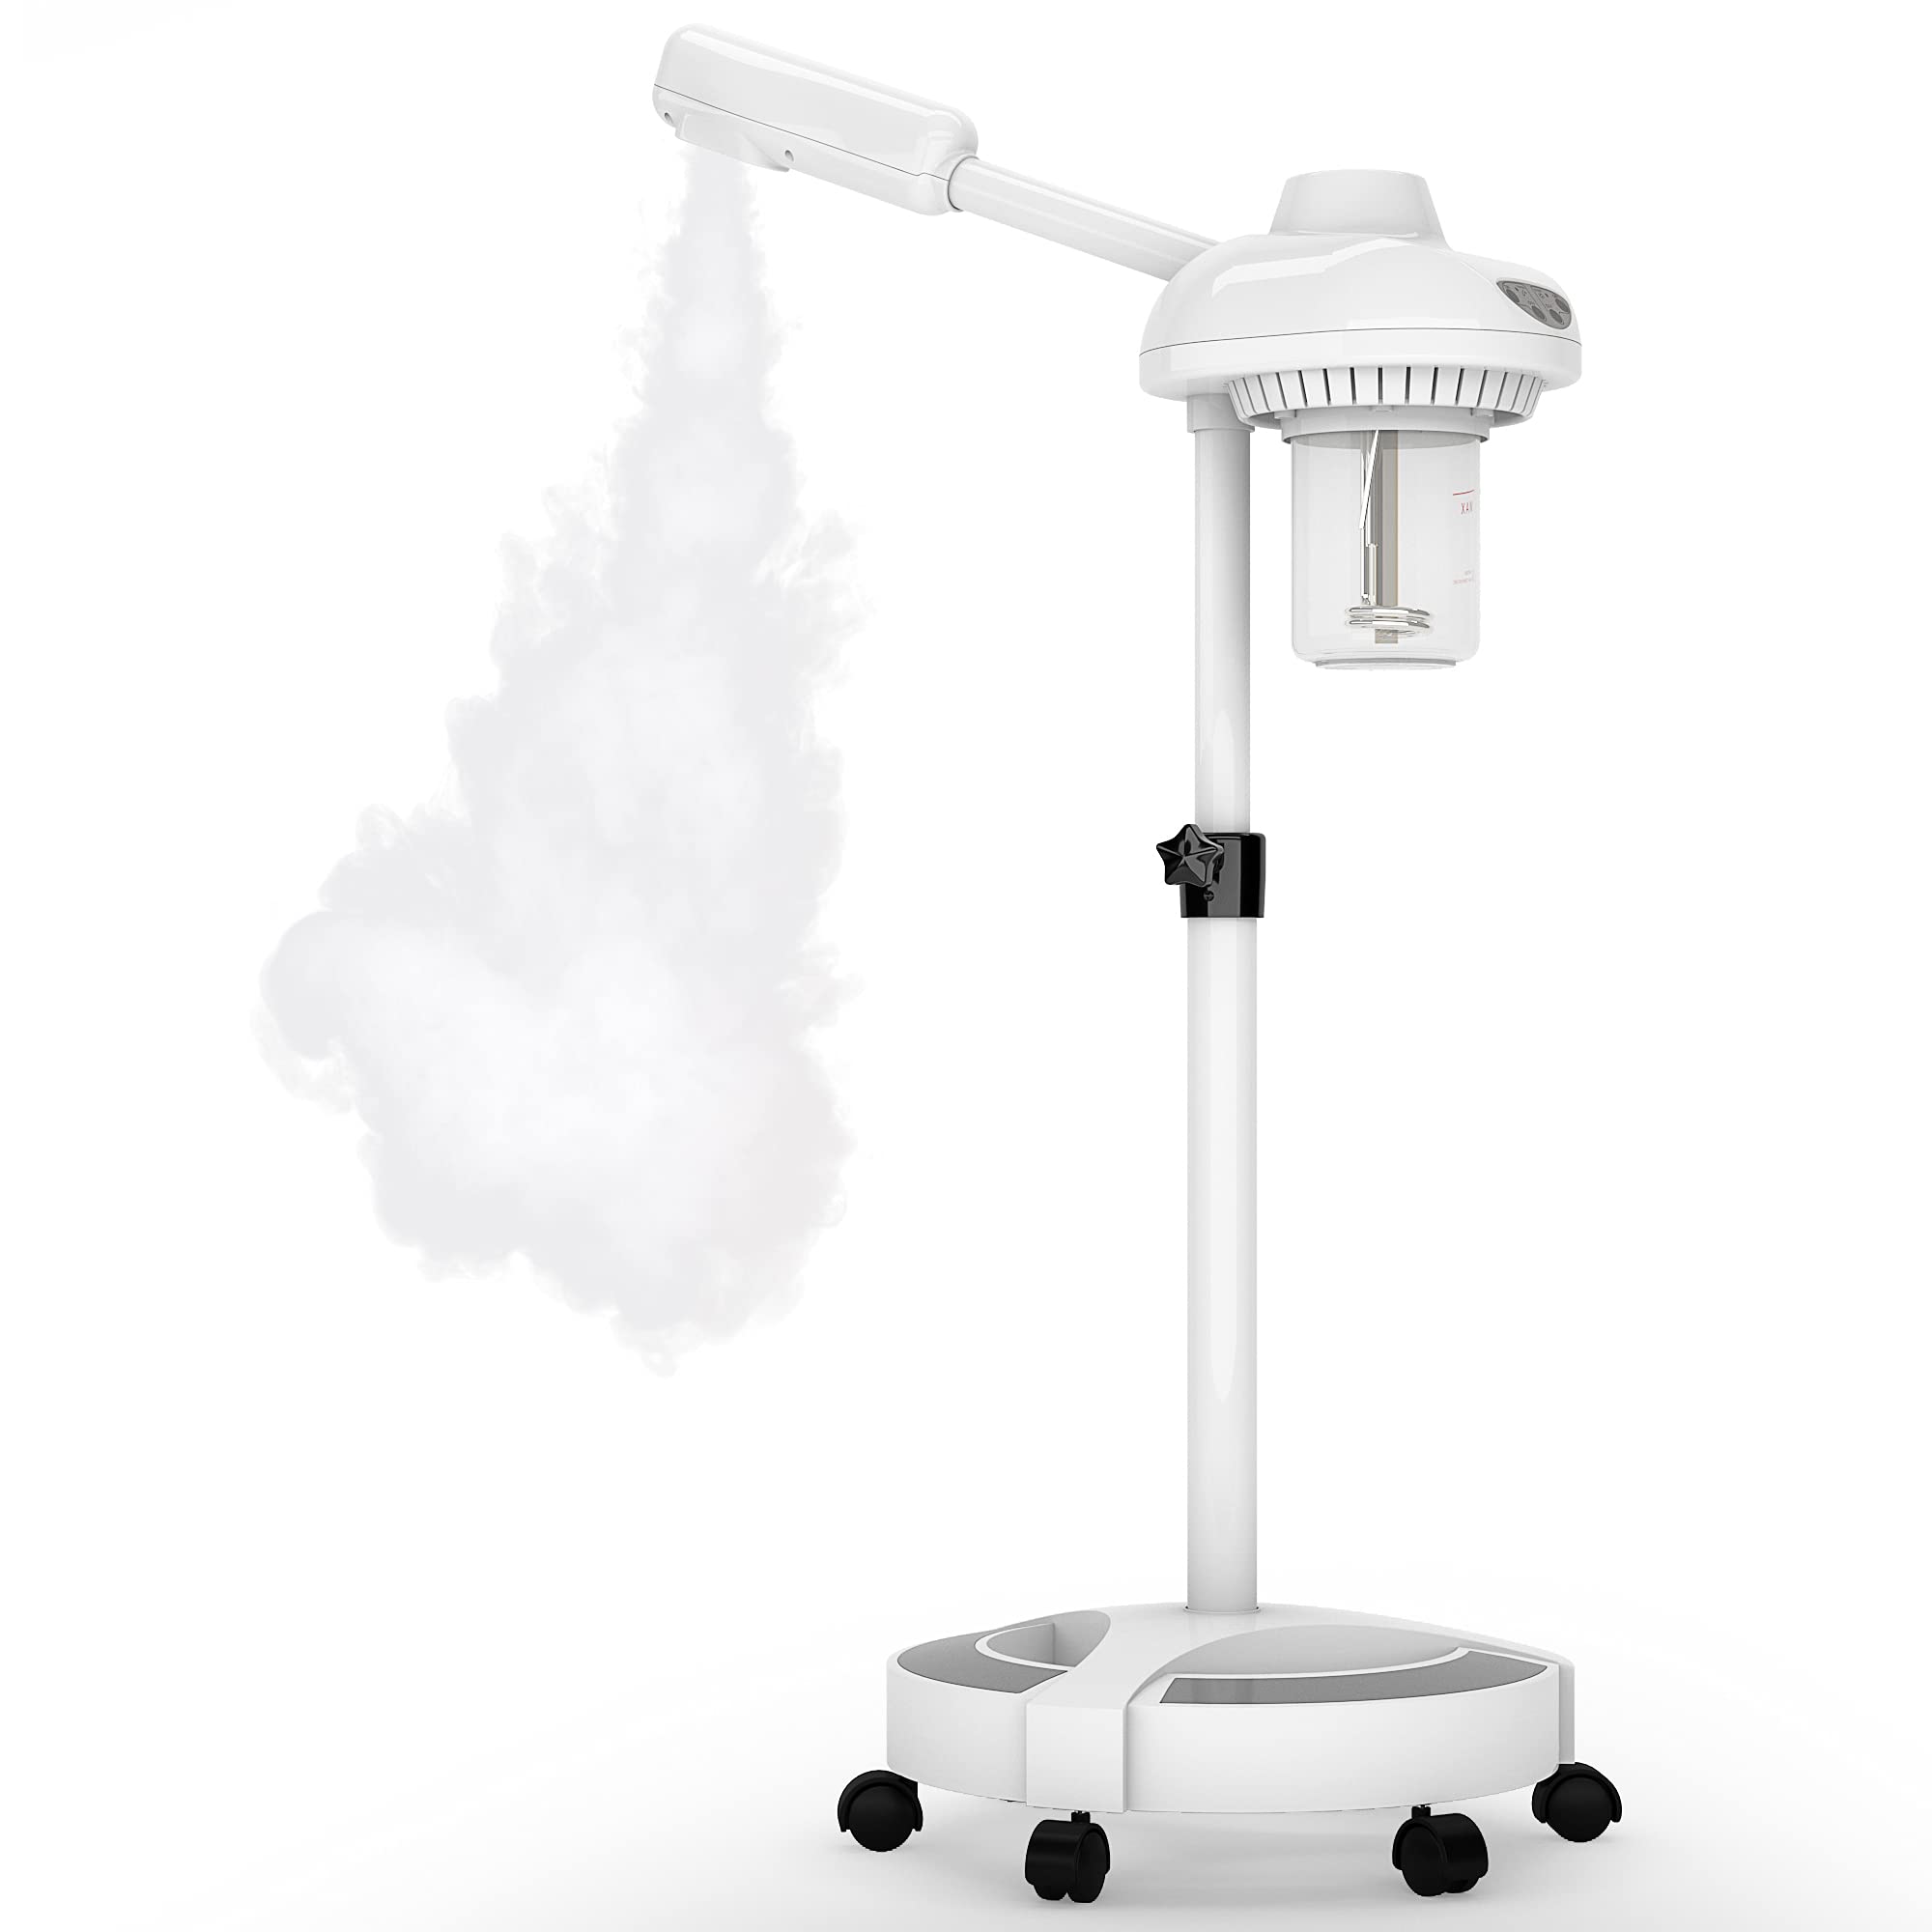 Professional Facial Steamer, Kingsteam Face Steamer with Stronger Steam and More Stable Wheel Rolling Base Design for Face Sauna Spa and Personal C...